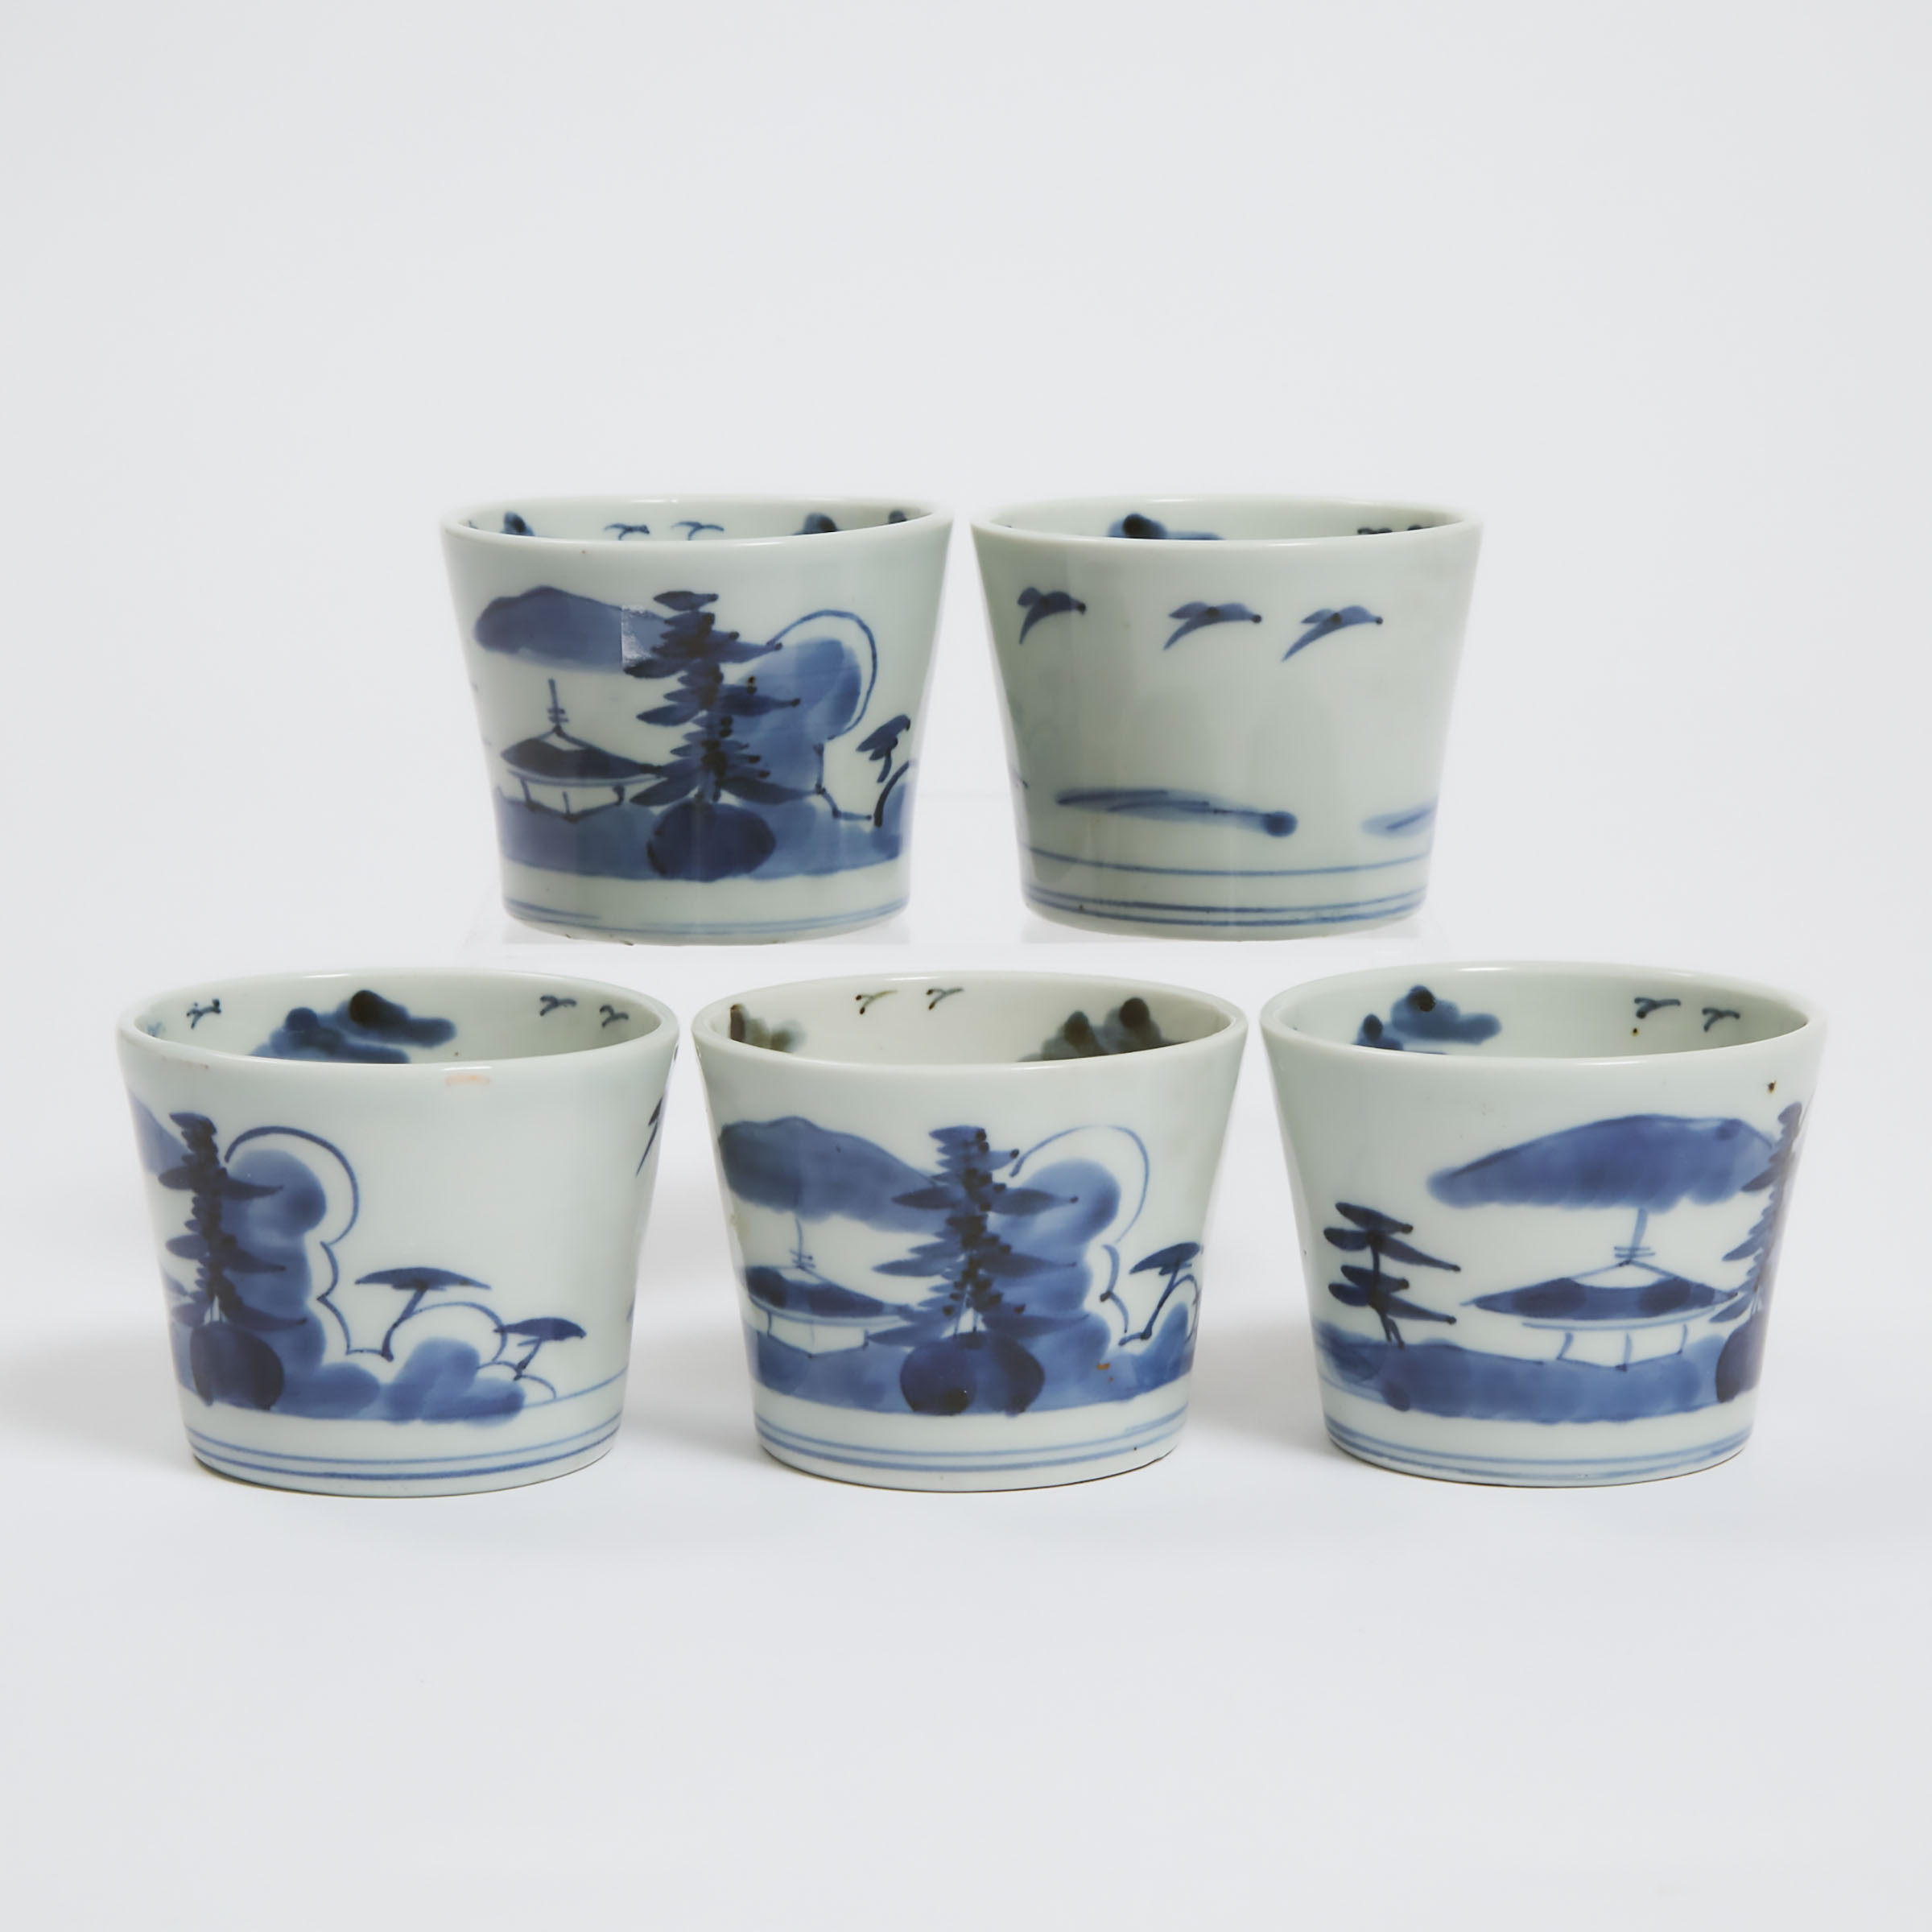 A Set of Five Blue and White Cafe-au-Lait Rimmed Tea Cups, 19th Century